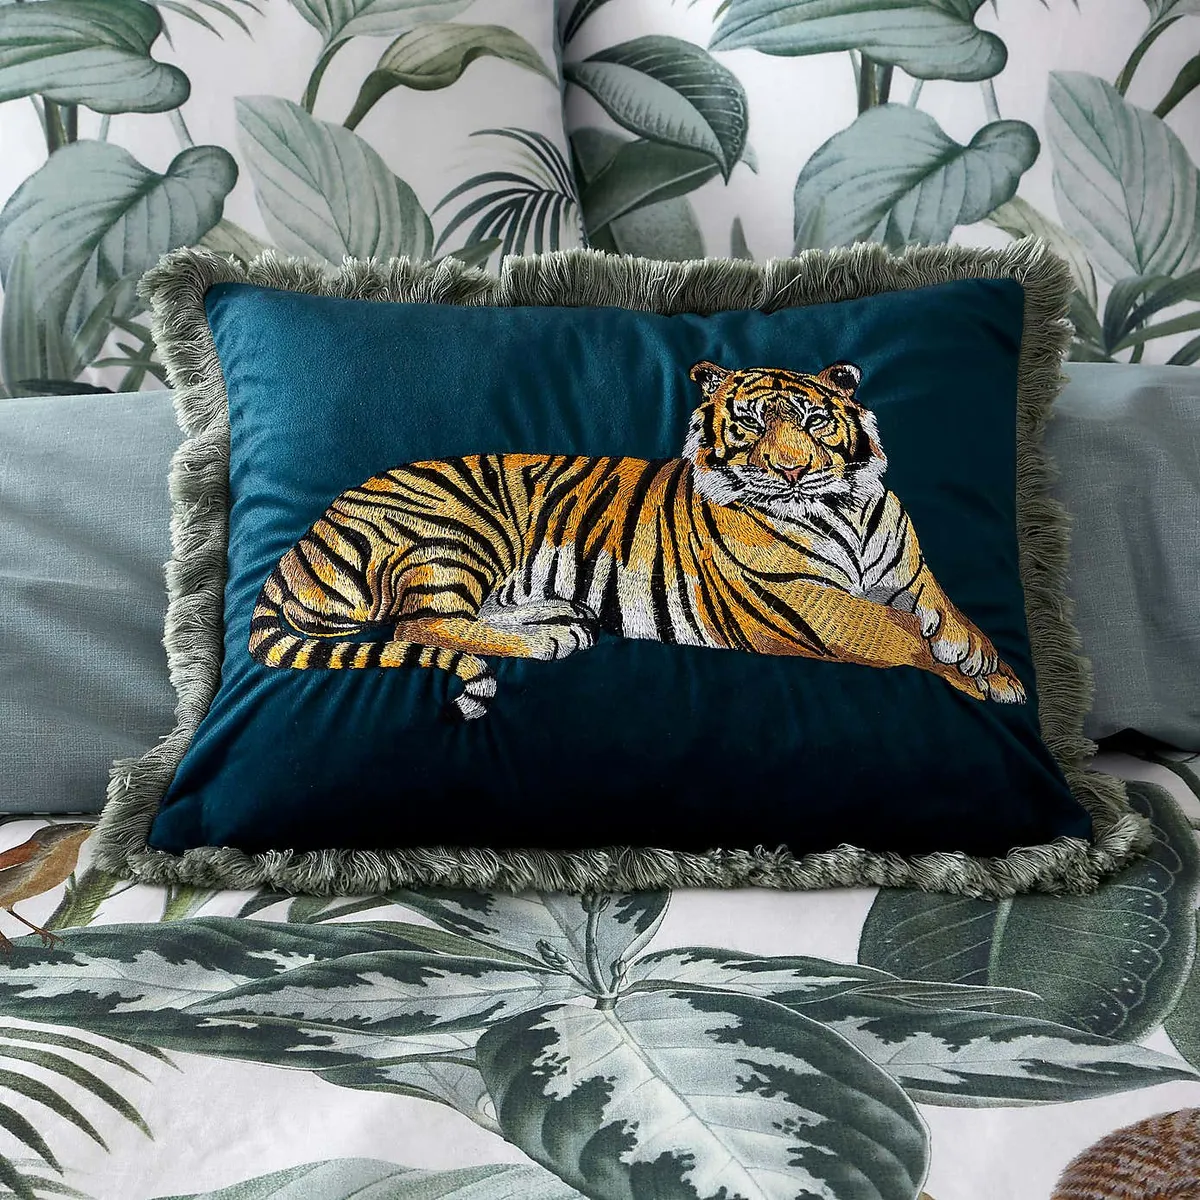 embroidered cushion with tiger pattern